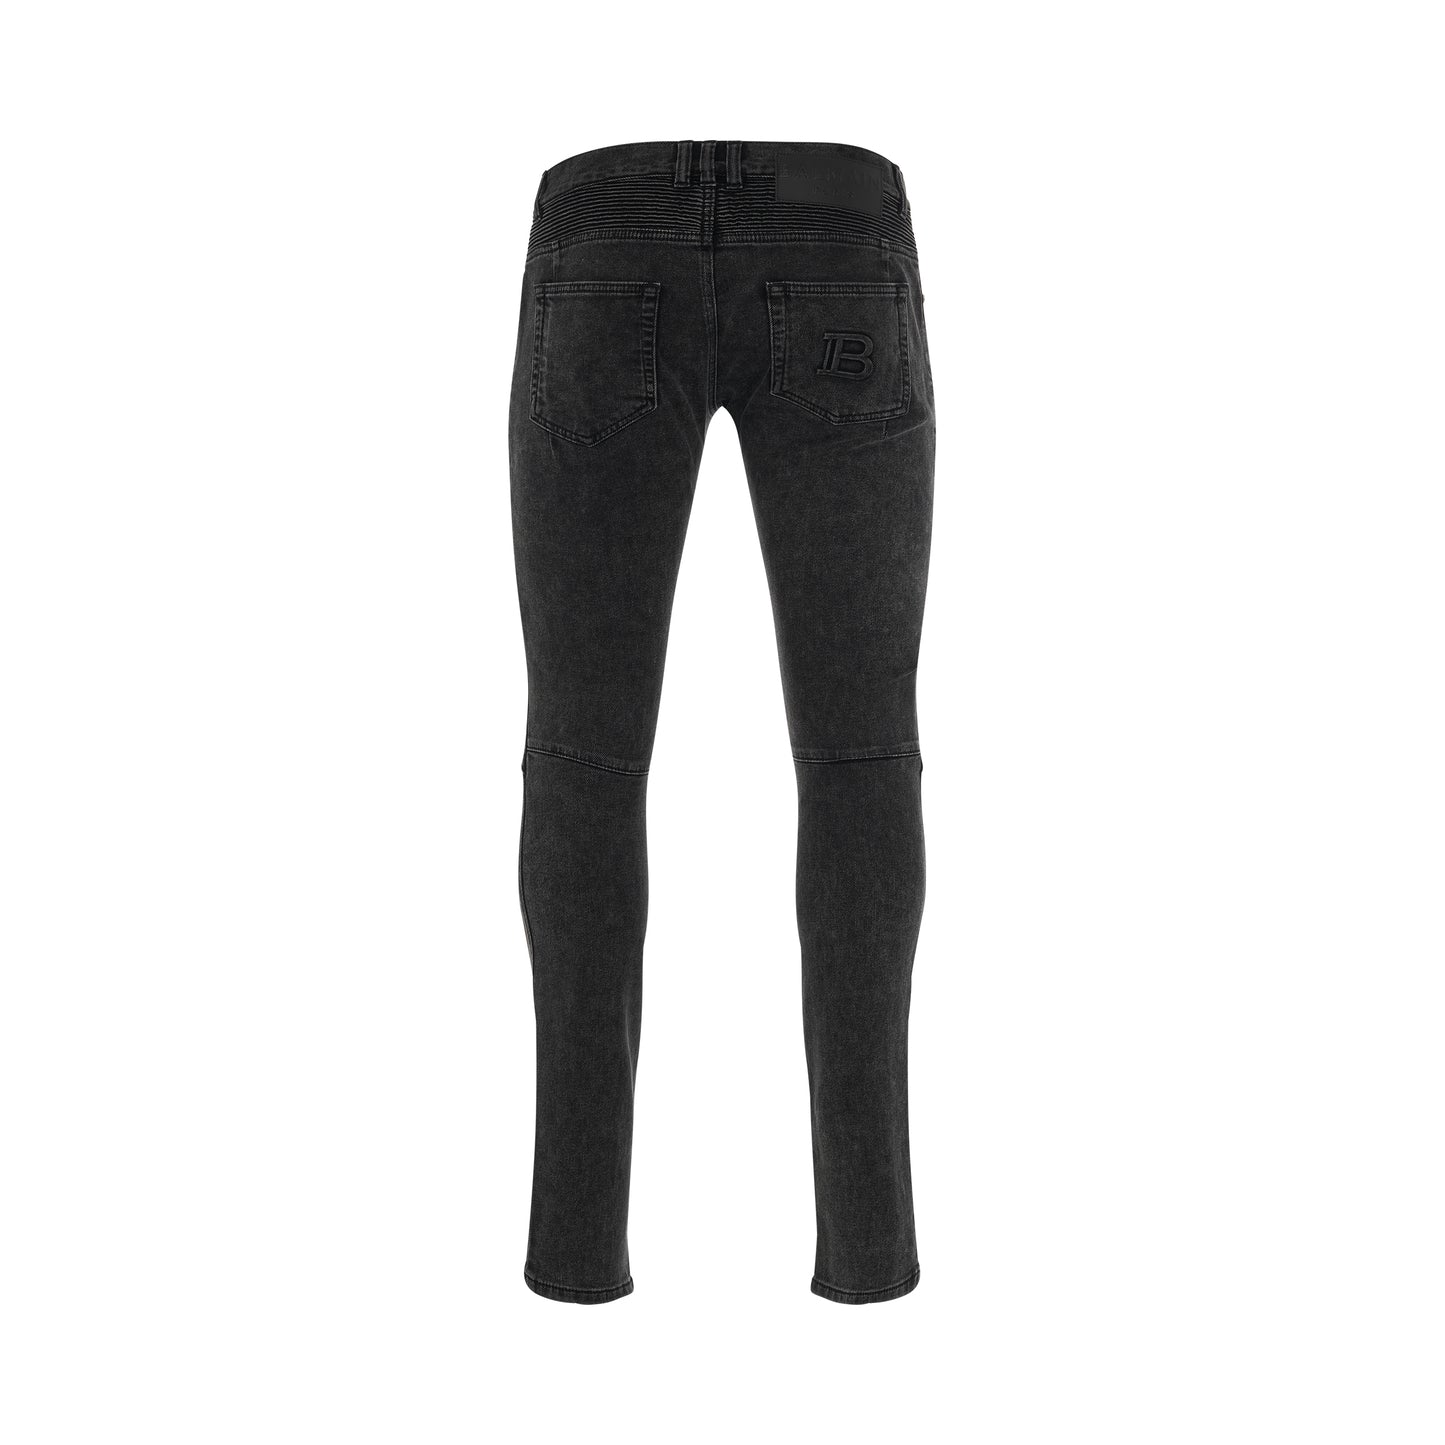 Ribbed Slim Multi-Cuts Jeans in Washed Black